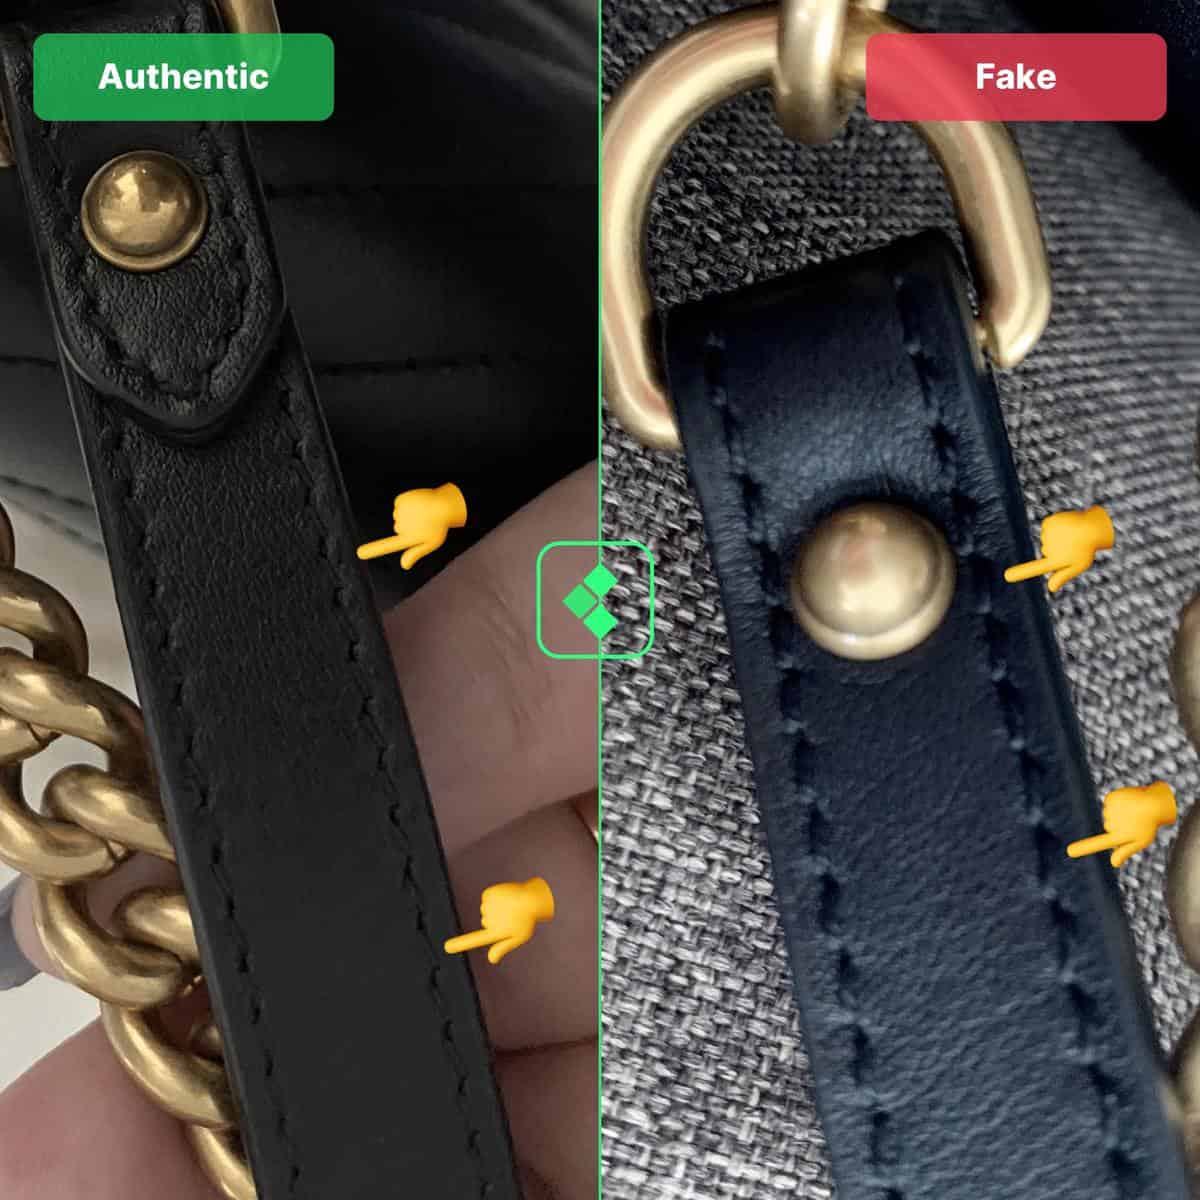 Real or Fake? How to Authenticate Your Gucci - EcoRing Singapore